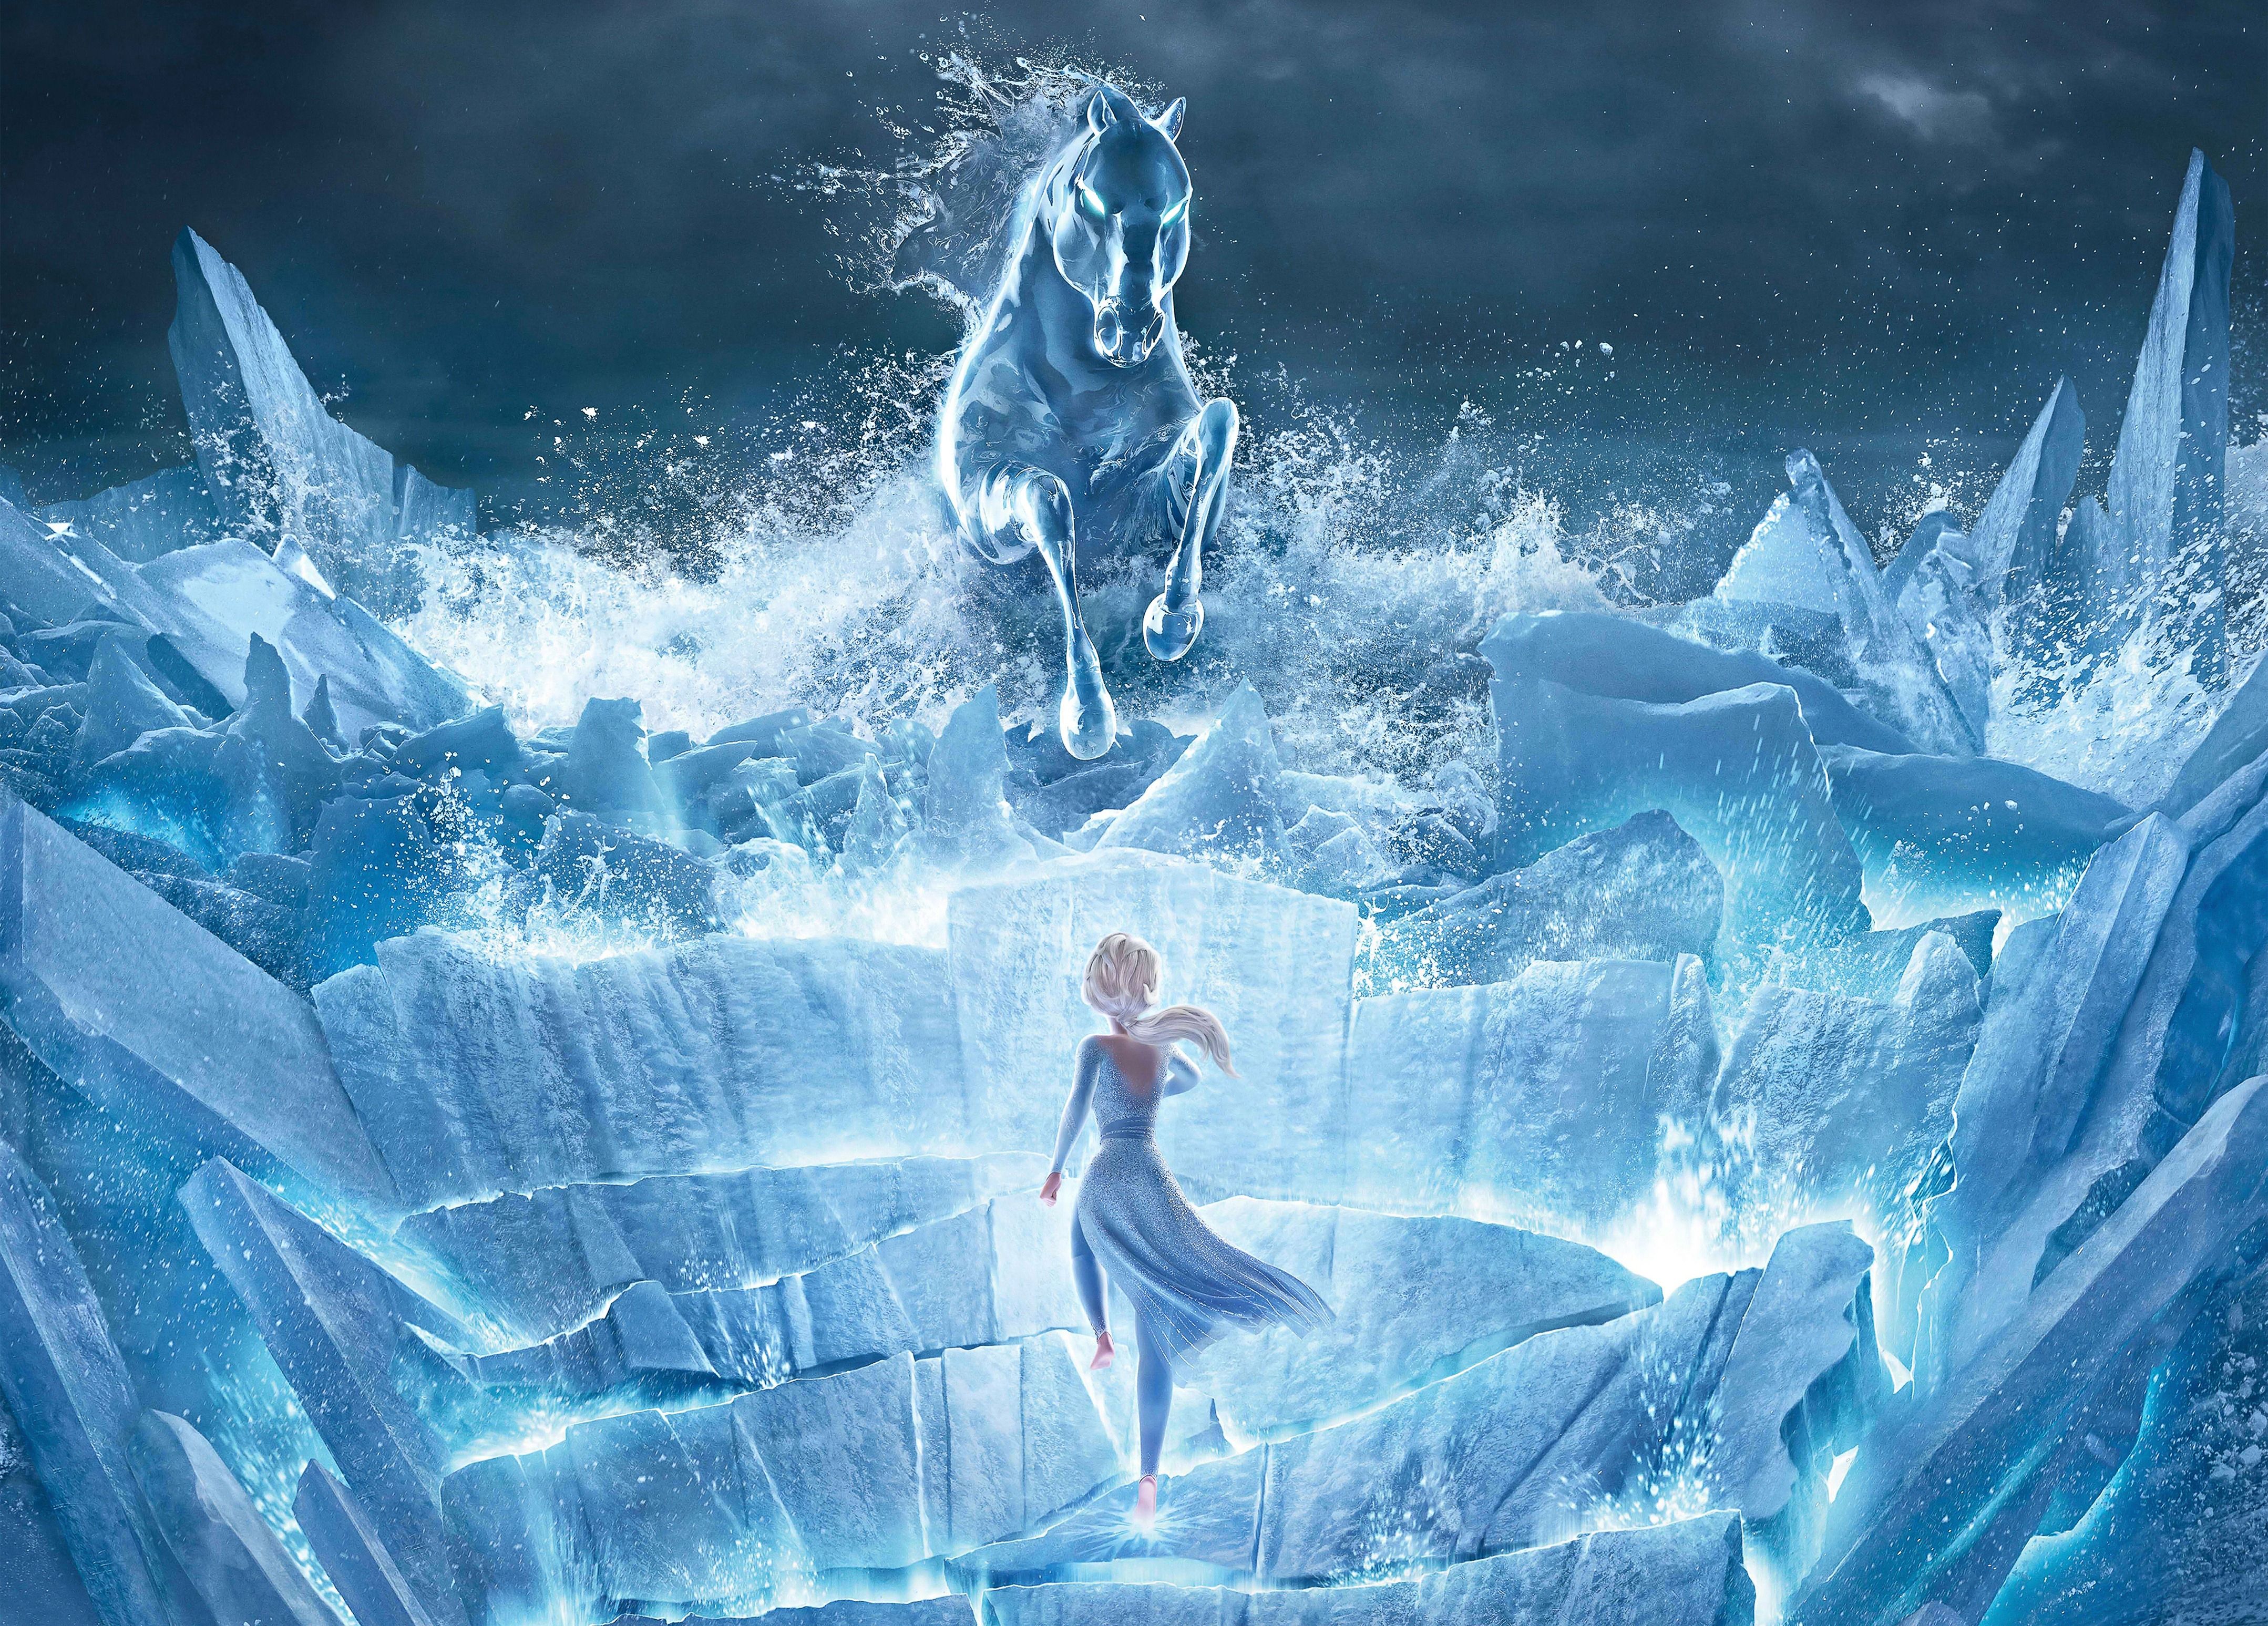 Elsa on an ice cliff with a horse wallpaper and image, picture, photo